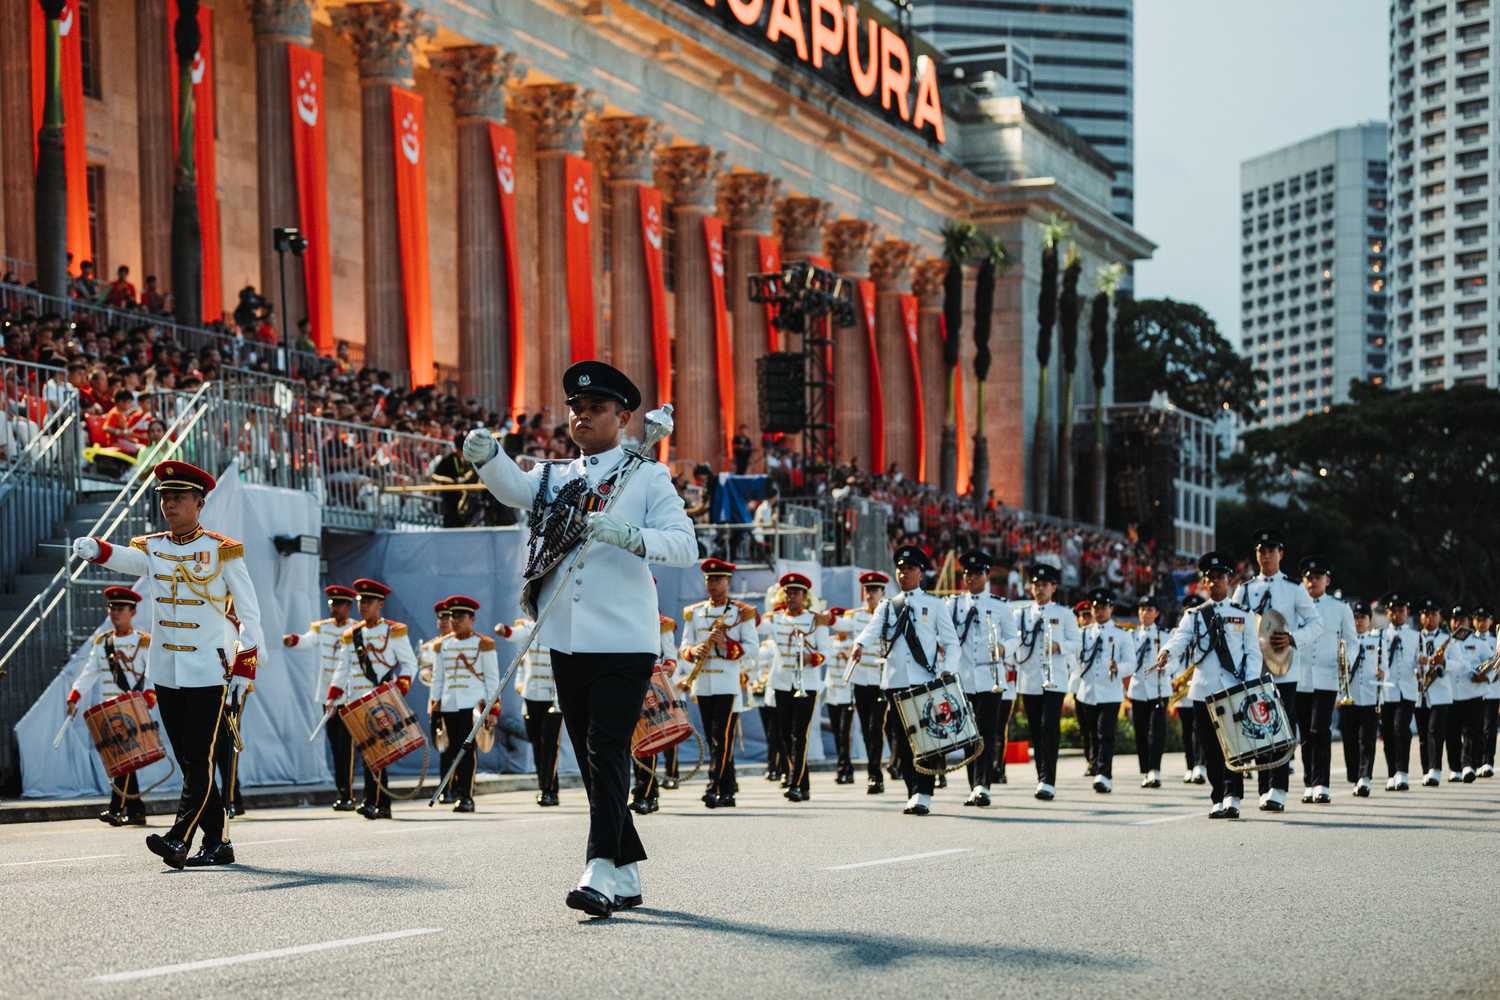 The SPF band marching along the road facing the national gallery of singapore. The officers face's look focused, one man leading his band members who march behind him while playing various instruments such as the bass drum, which has the SPF logo on it.